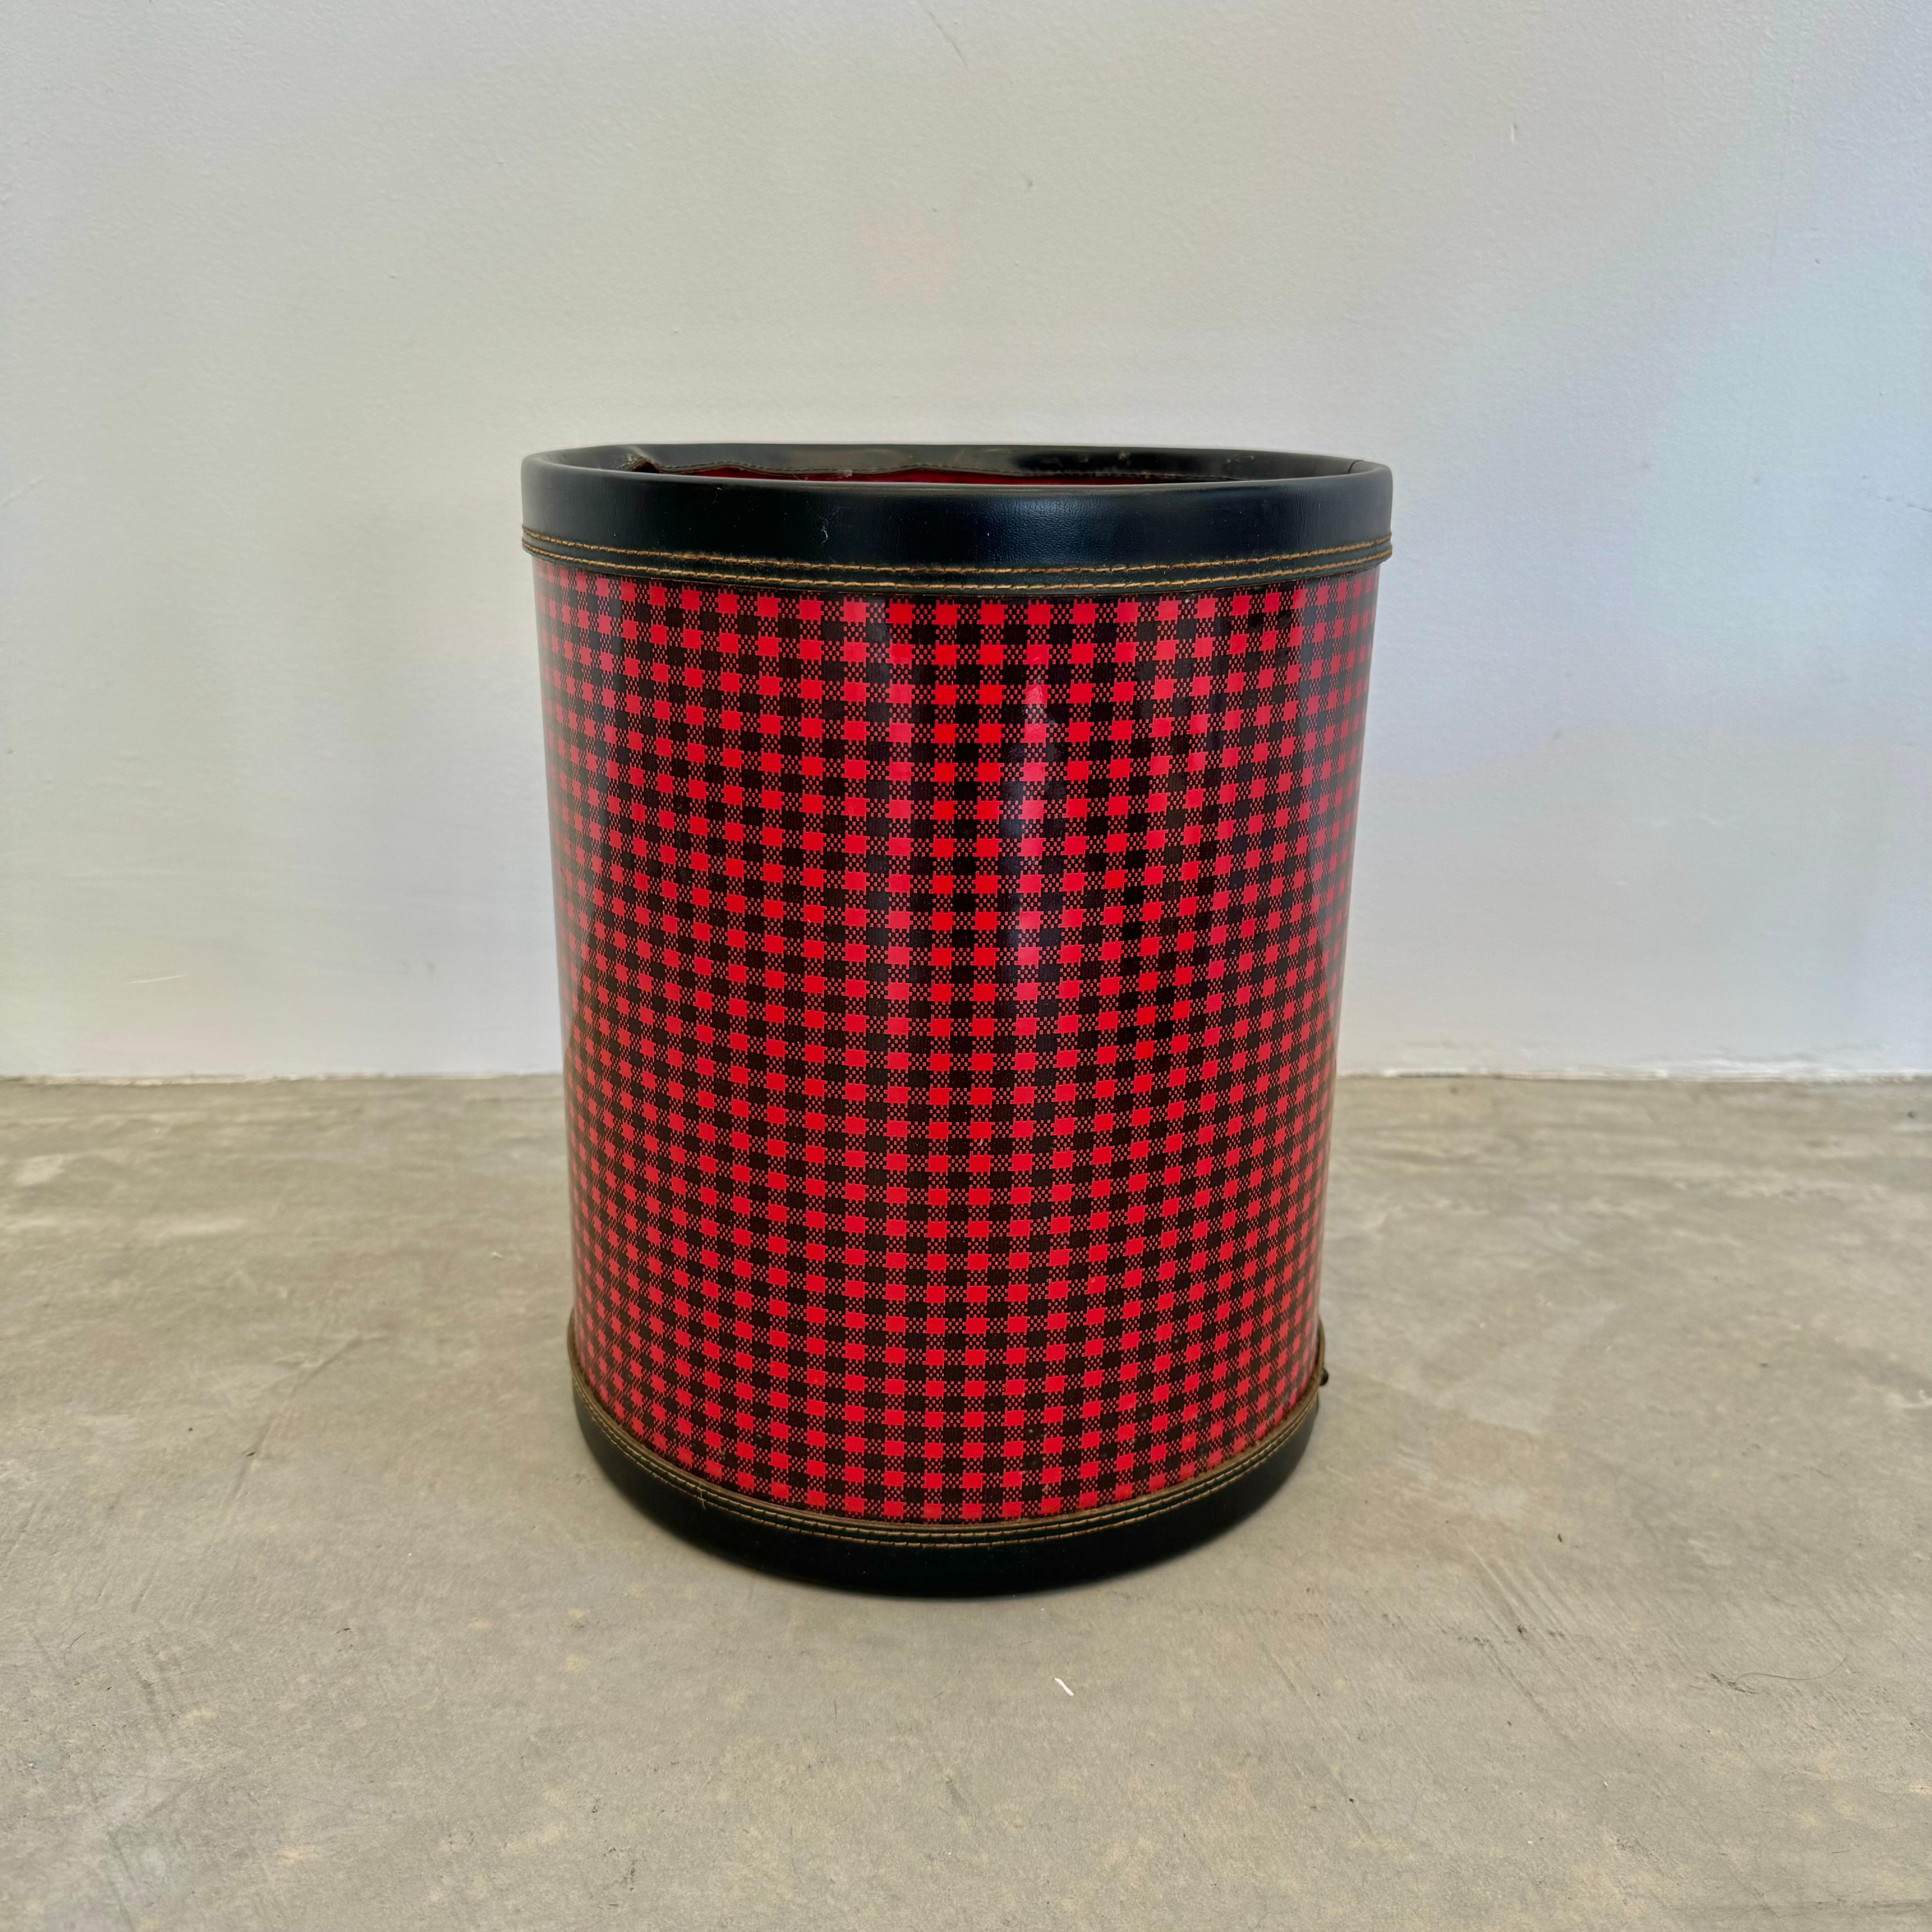 A unique and fun waste bin in a vibrant red and black buffalo check plaid. Made in the style of Jacques Adnet. Presents well and adds great personality to a room. Made of a hardy plastic that stands up to wear.

Located at our Los Angeles showroom.